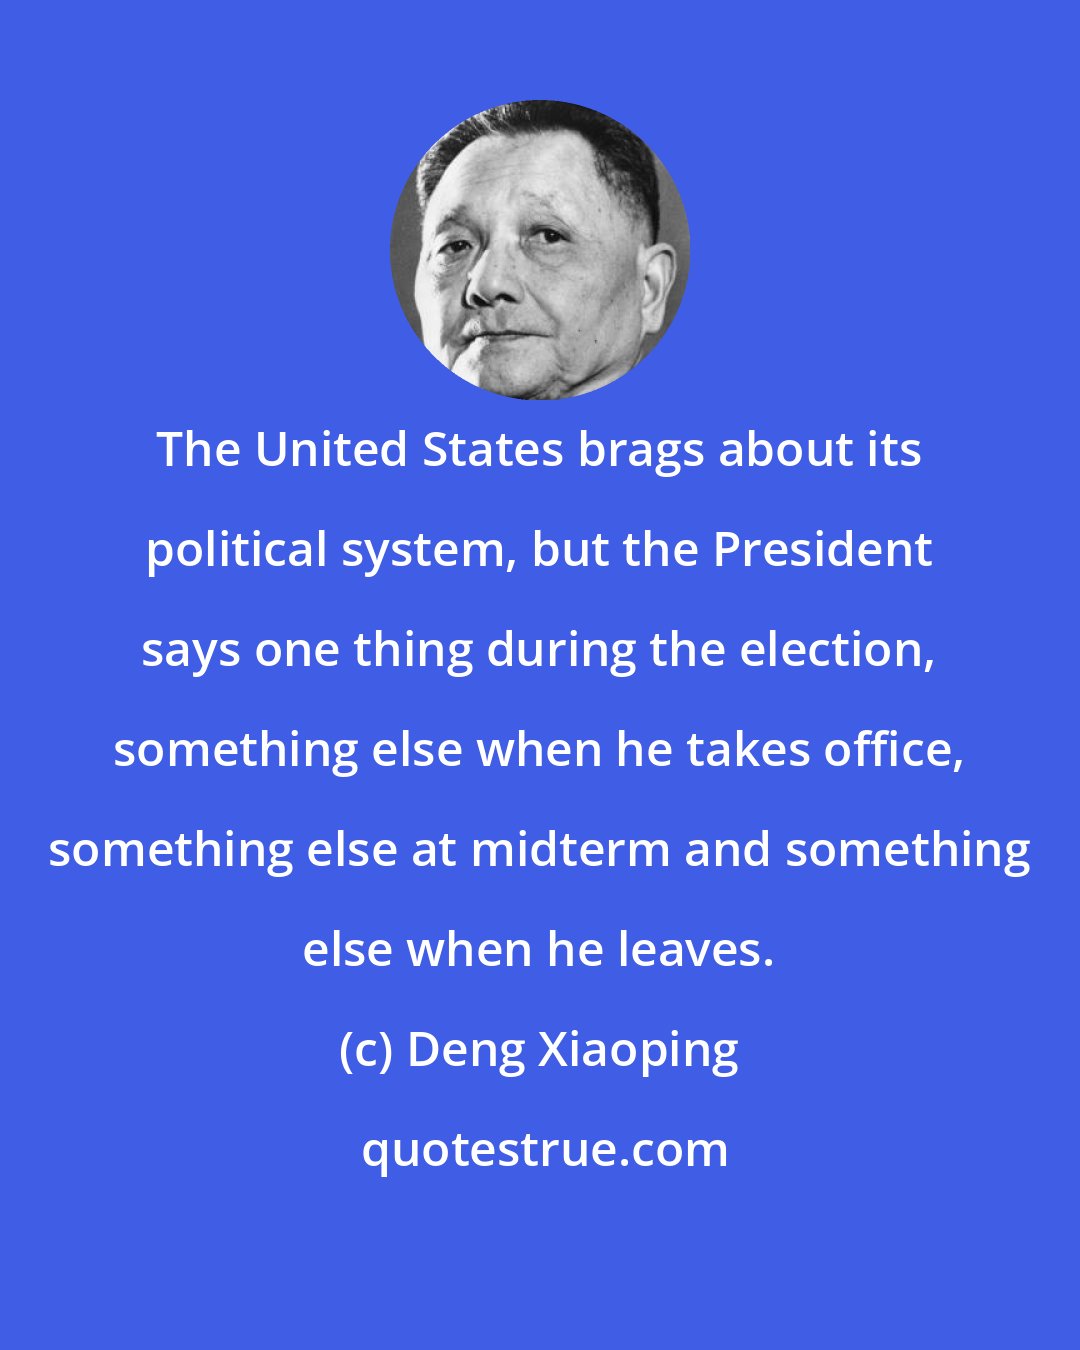 Deng Xiaoping: The United States brags about its political system, but the President says one thing during the election, something else when he takes office, something else at midterm and something else when he leaves.